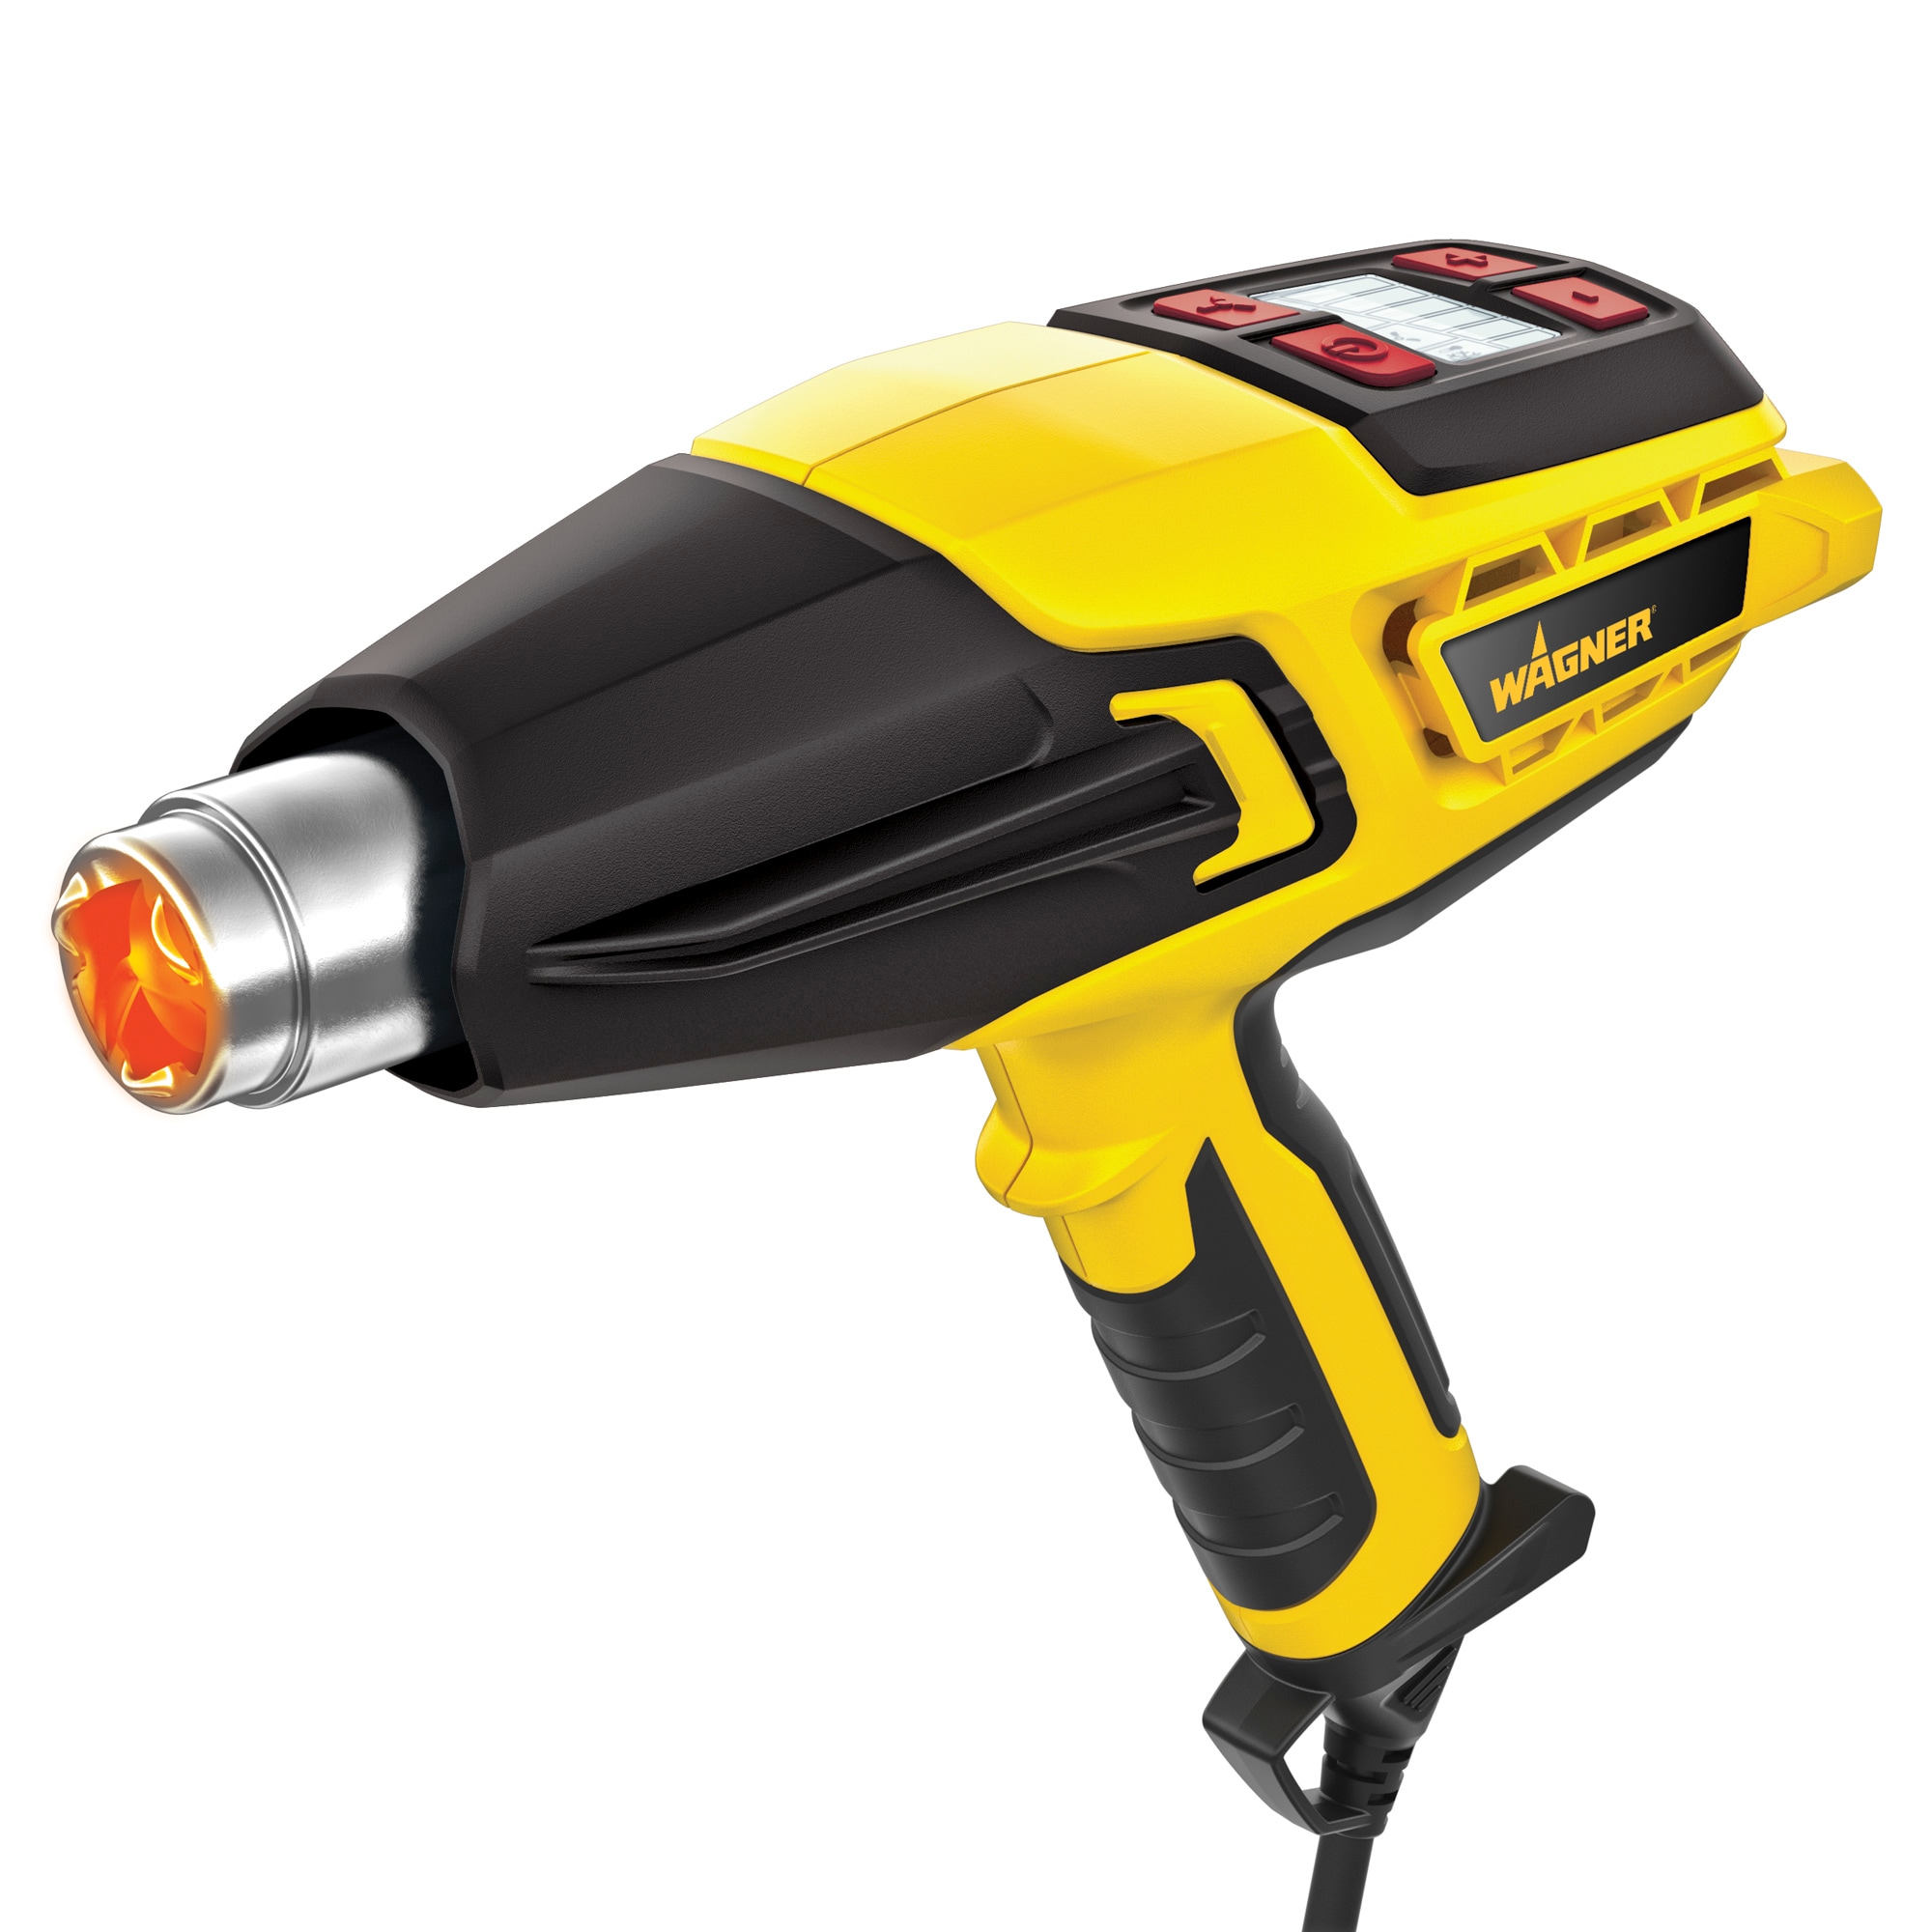 Heat Gun 1800 Watt Variable Speed High and Low For Craft Projects and DIY  with Tip Attachment 